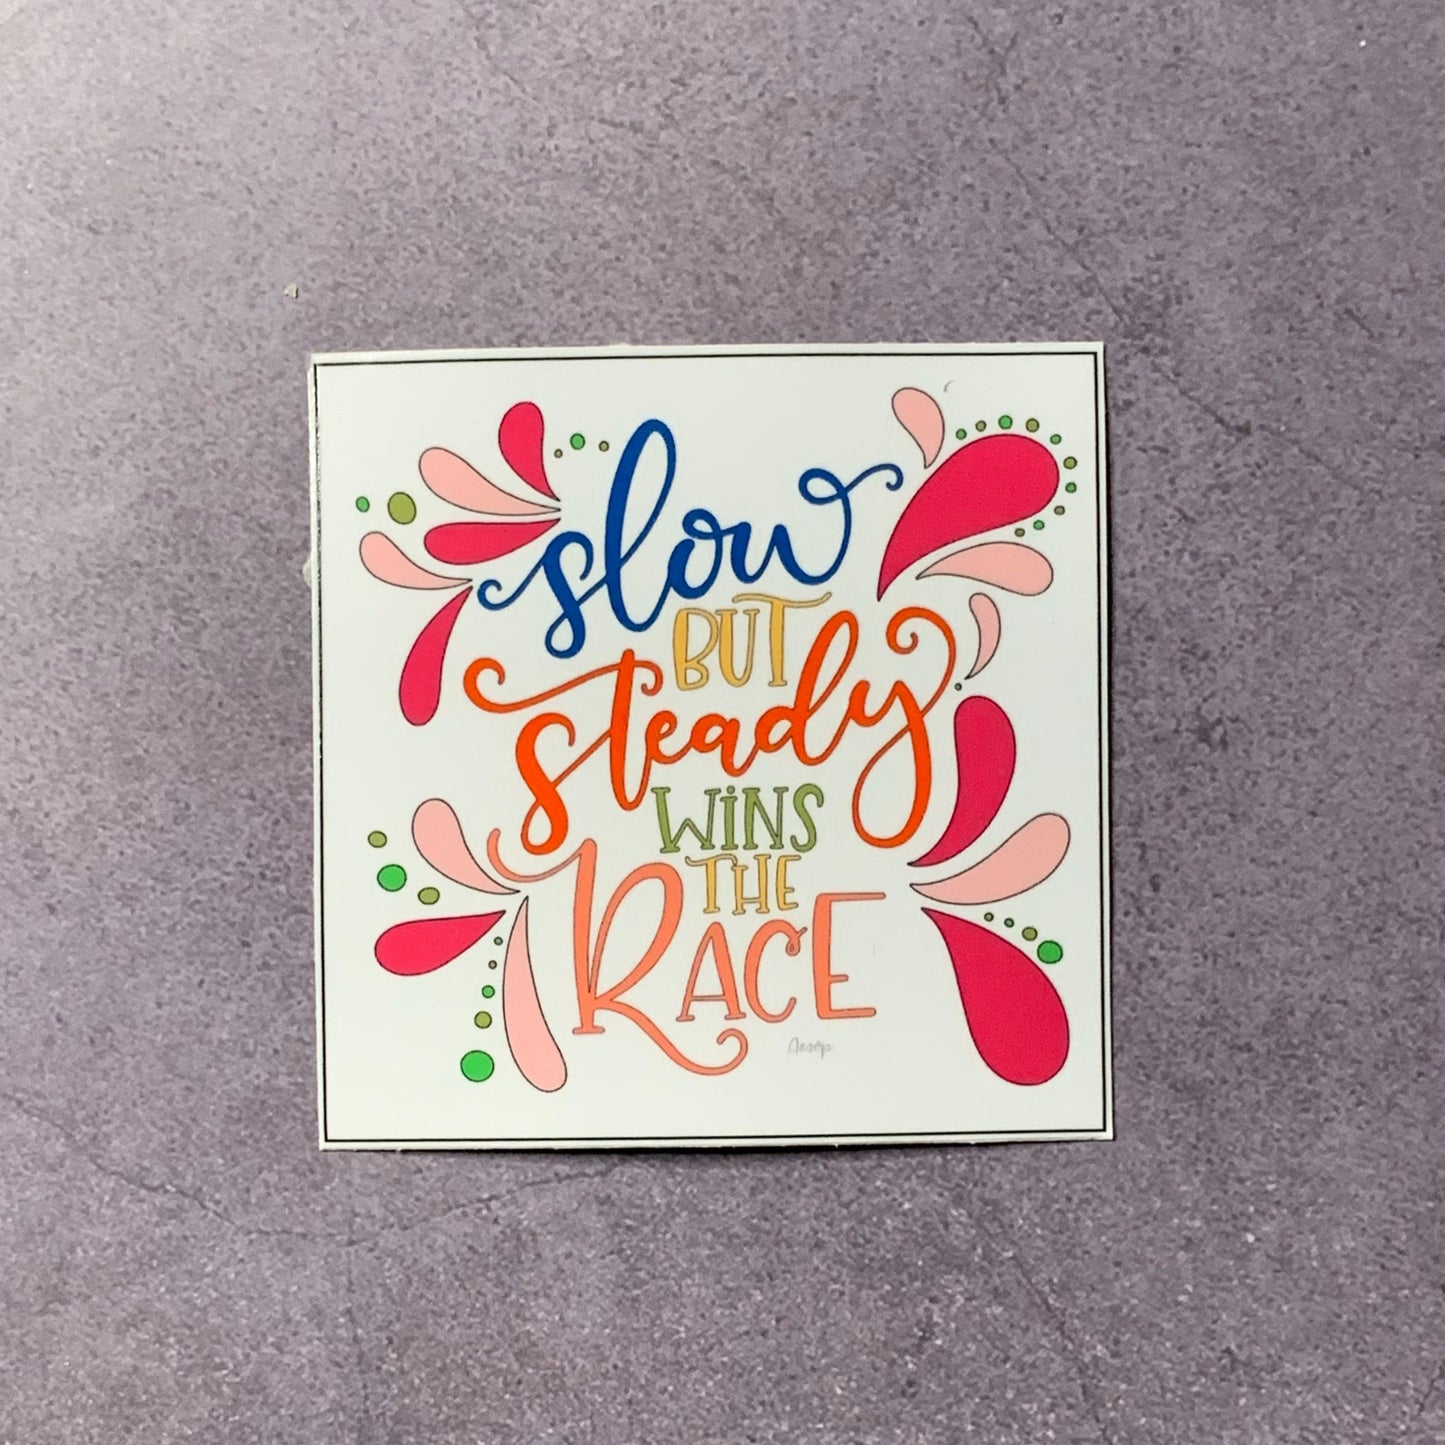 Slow But Steady Wins The Race Square Vinyl Sticker